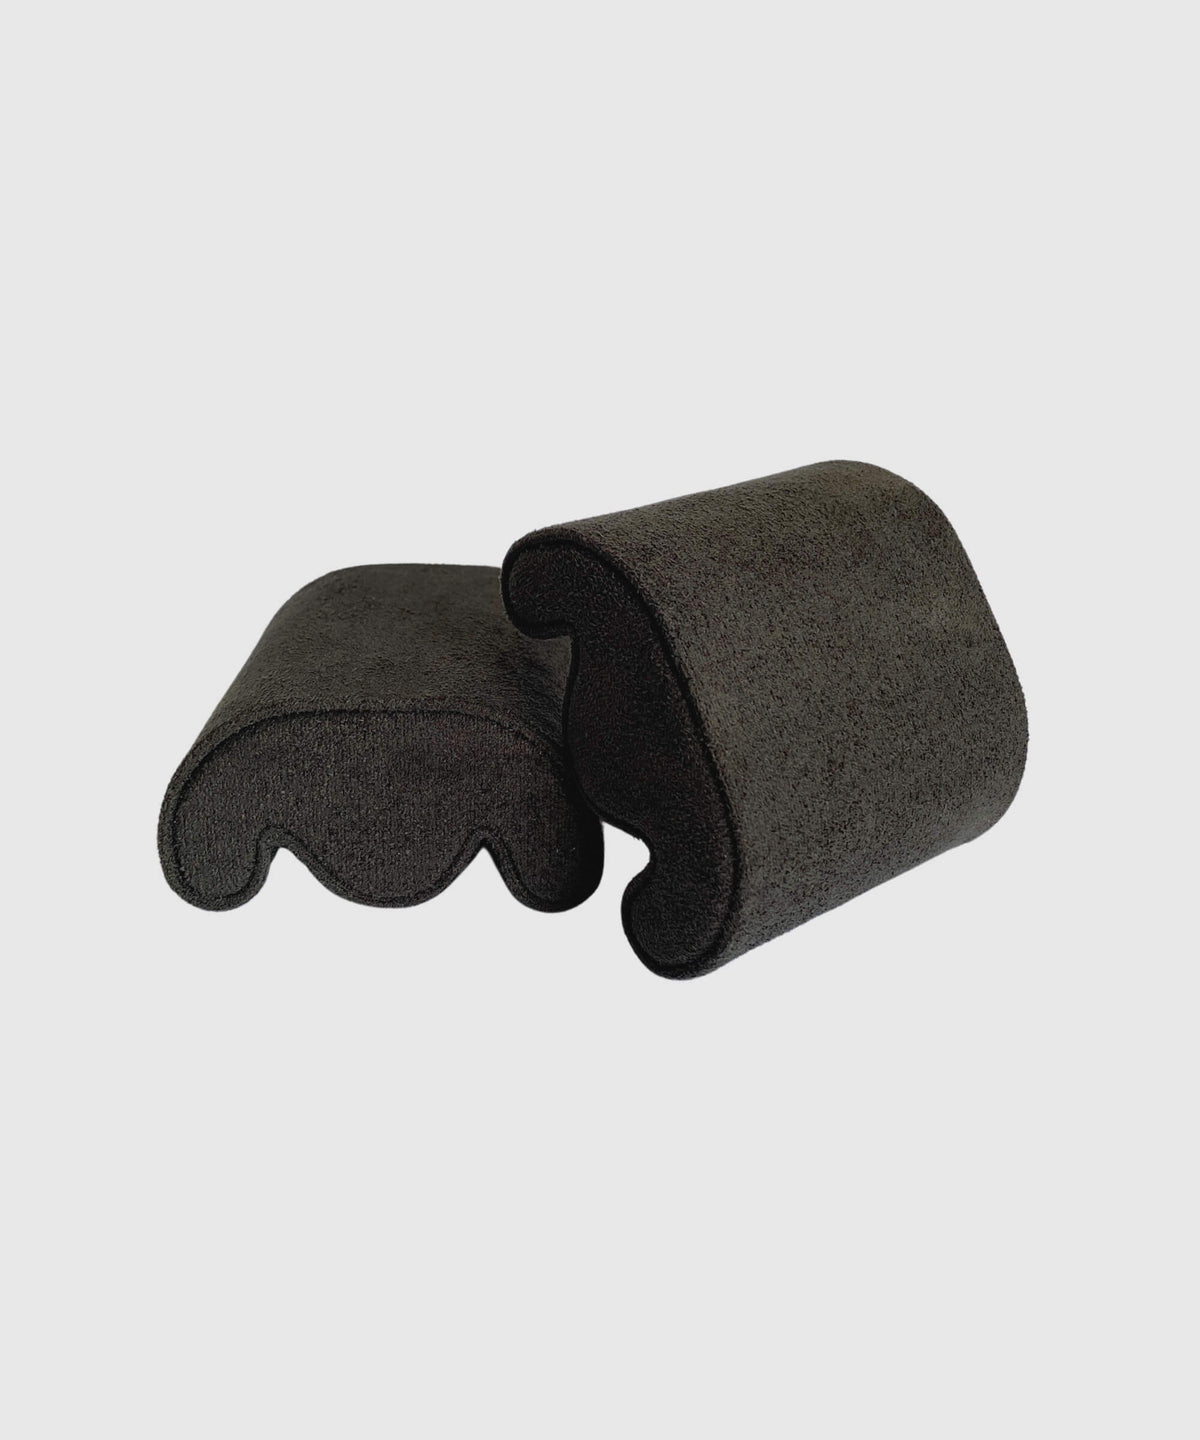 A pair of TAWBURY Fraser Replacement Watch Case Pillows - X-Small - Black/Charcoal, suitable for any wrist size, on a white background.